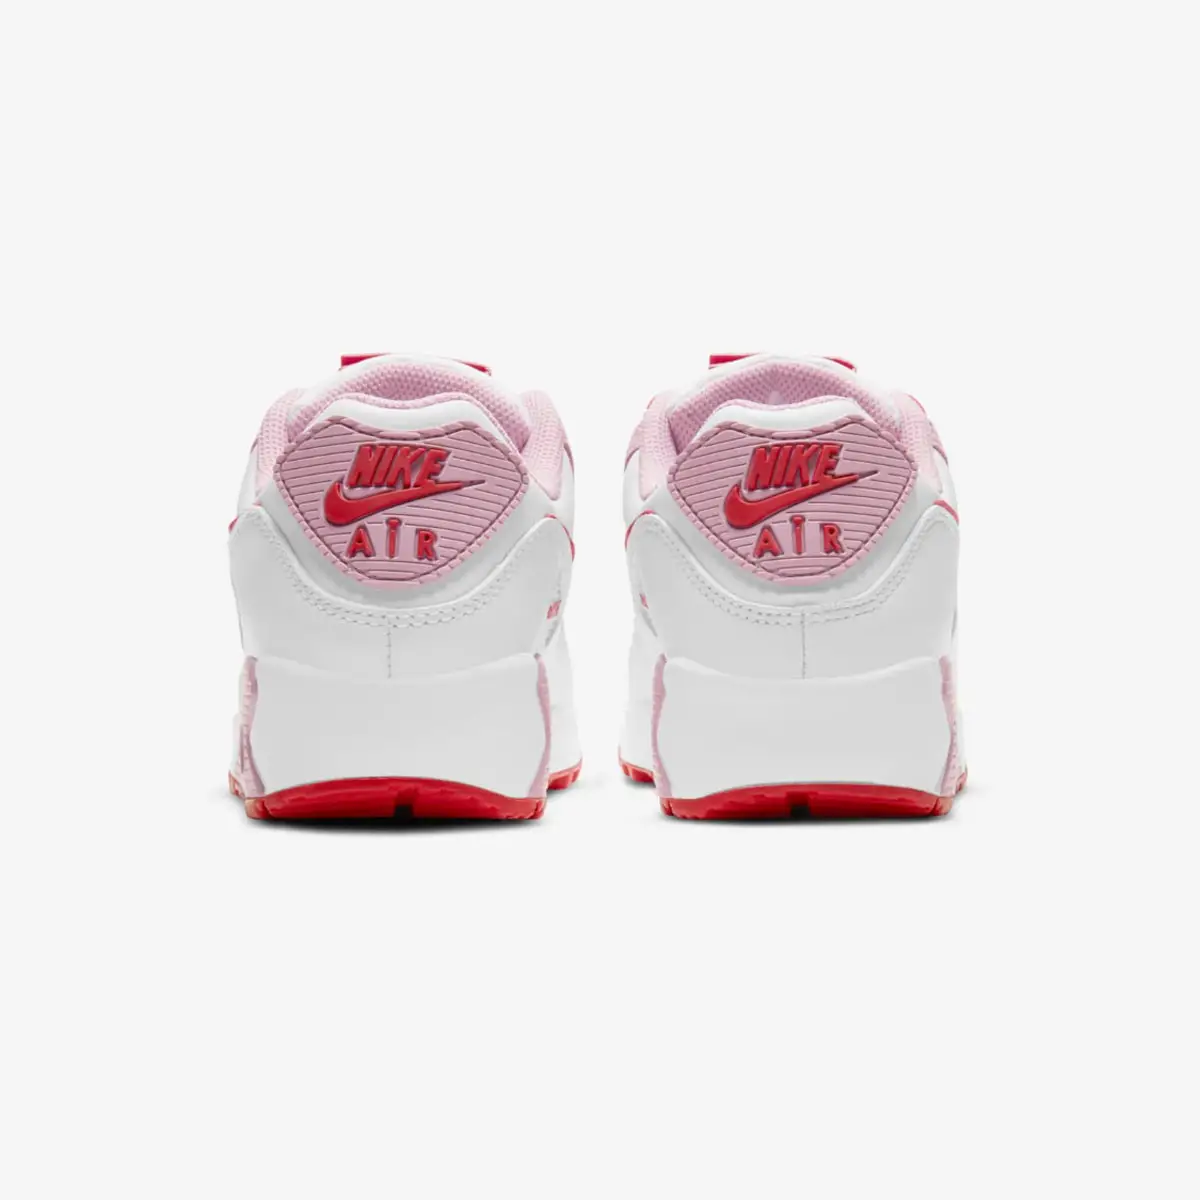 Nike valentines day sneakers air max 90